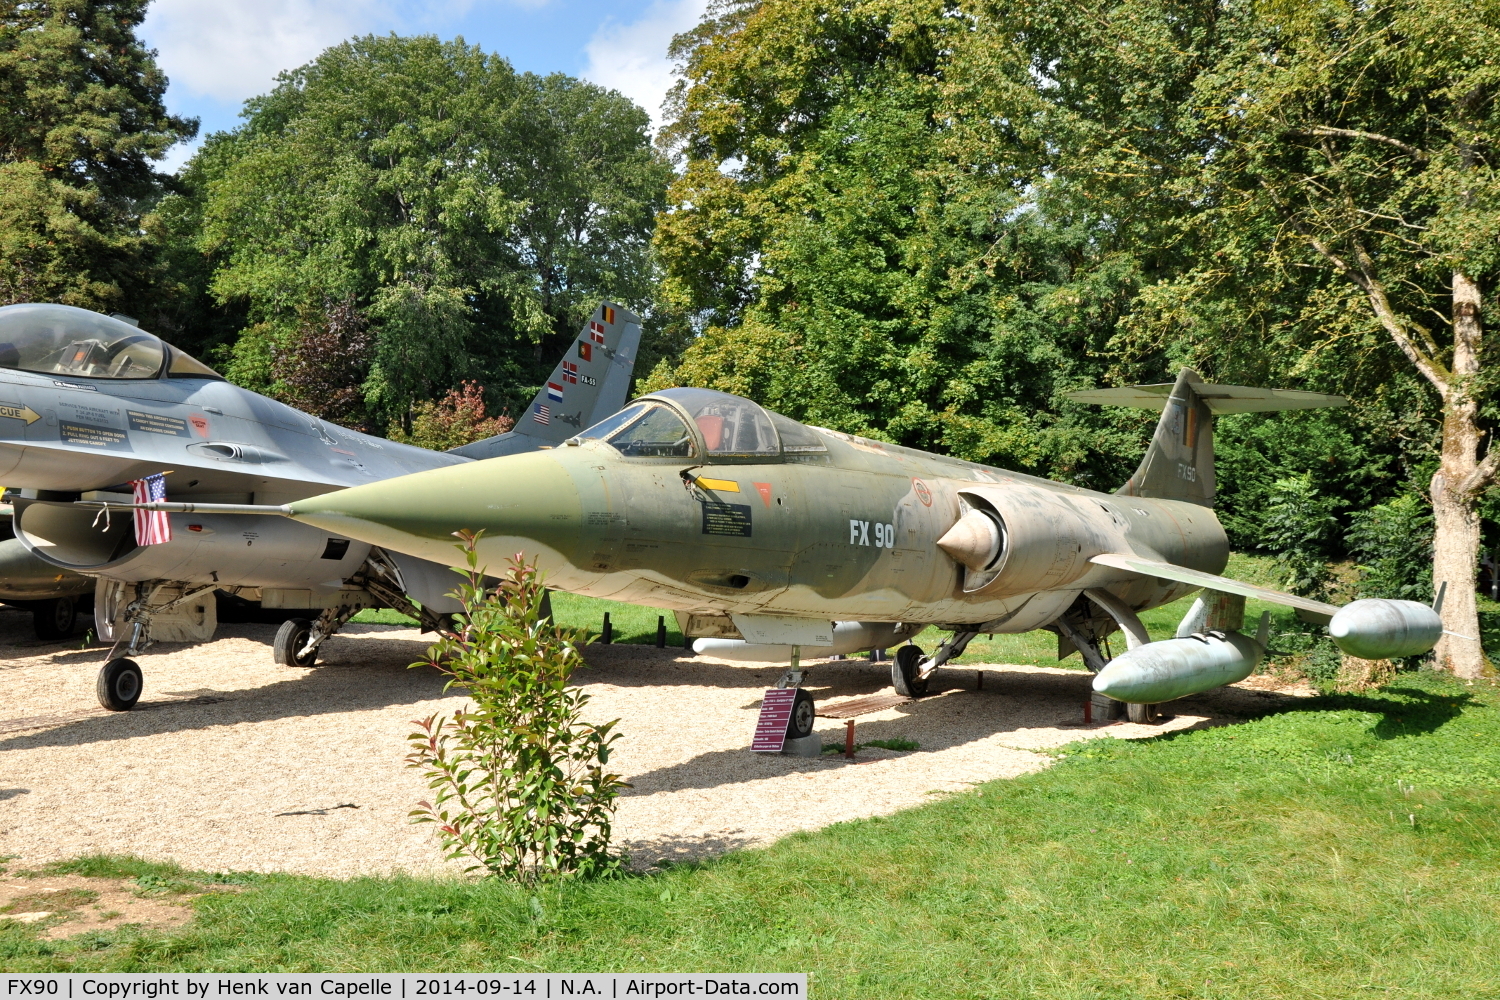 FX90, Lockheed F-104G Starfighter C/N 683-9154, Belgian Air Force F-104G in the museum at Savigny-les-Beaune, France.